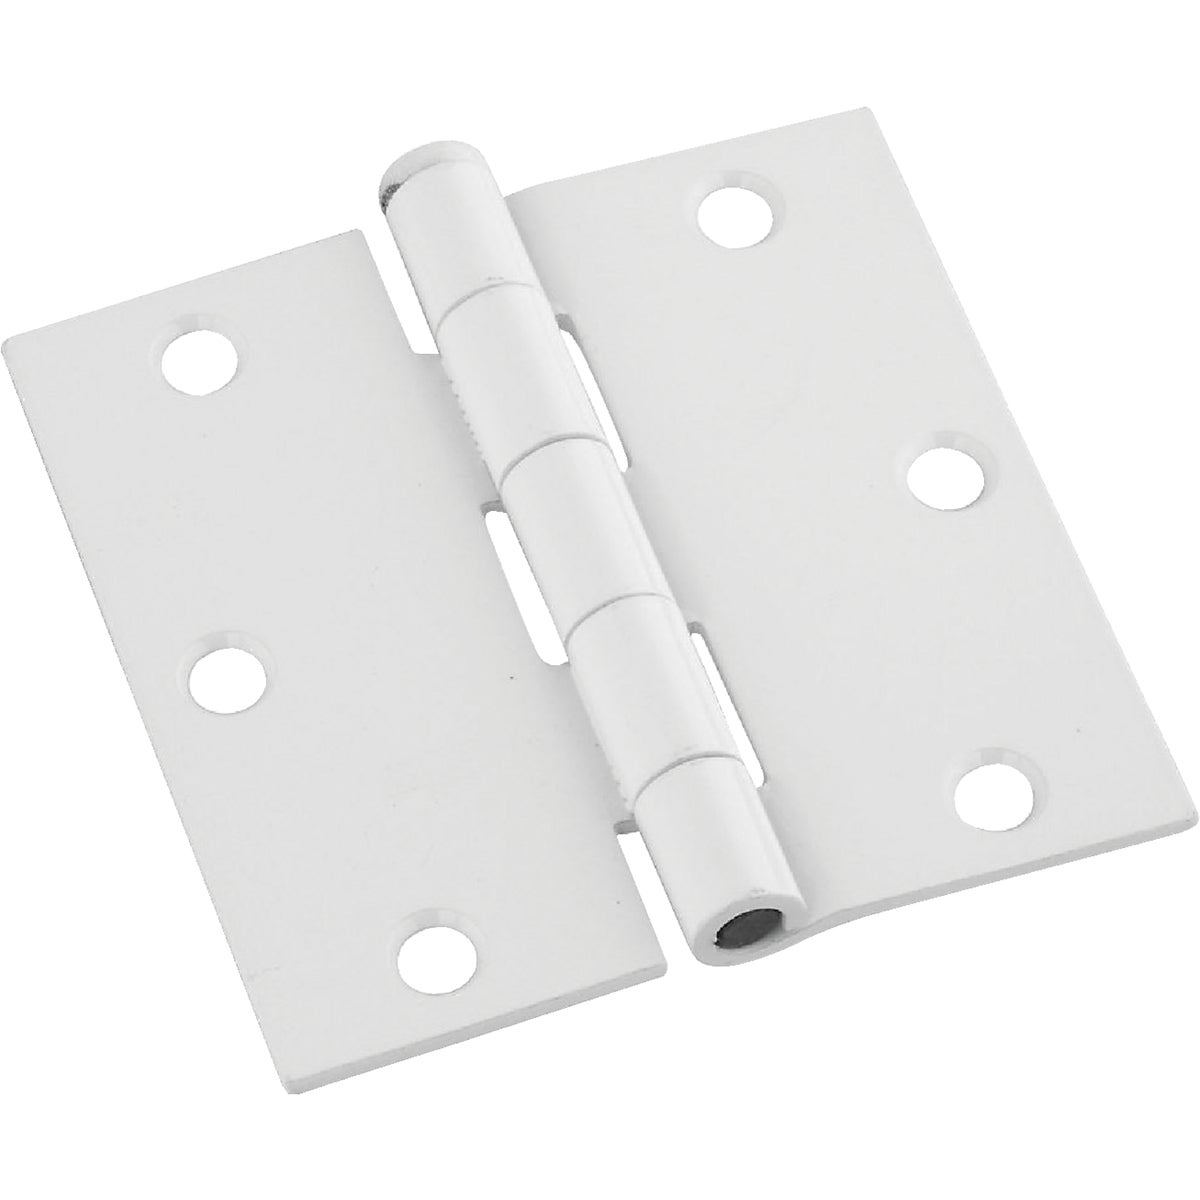 National 3-1/2 In. Square White Door Hinge (3-Pack)